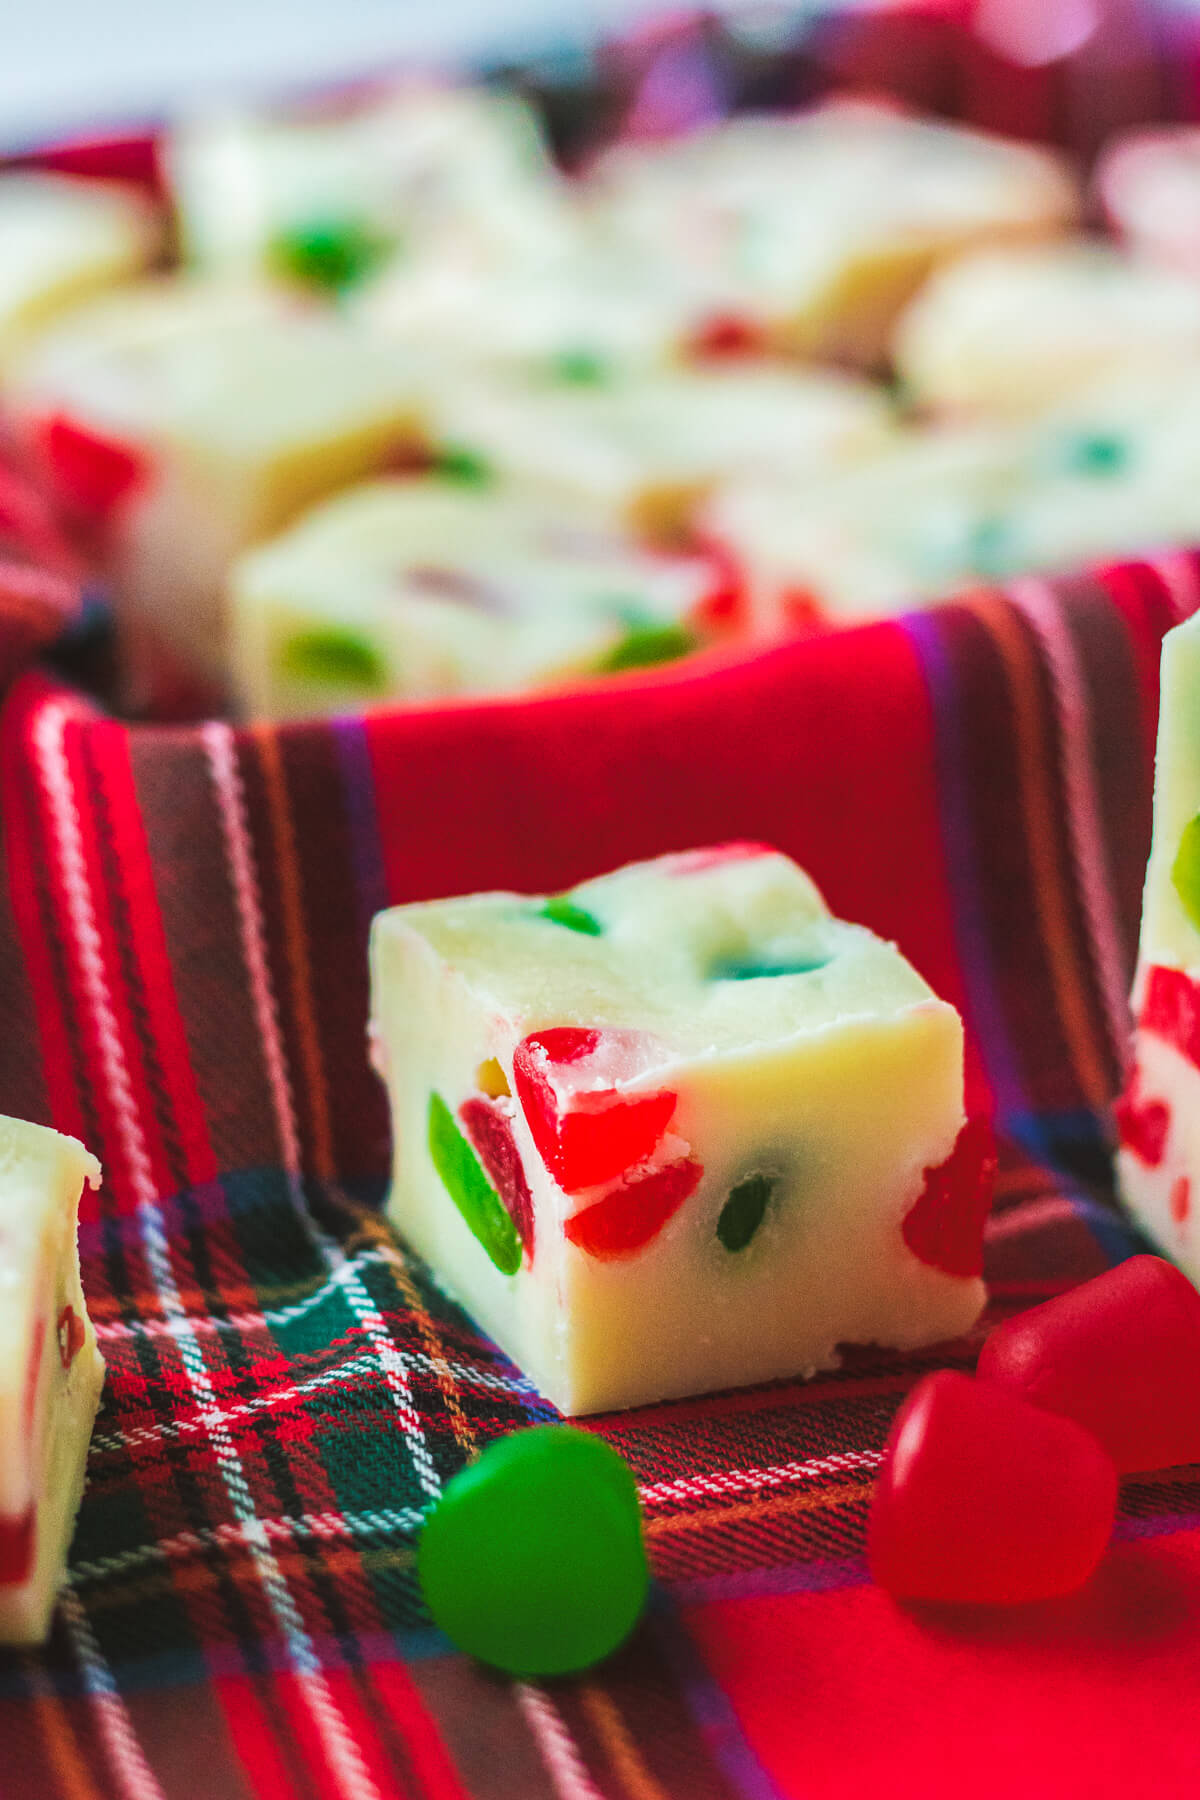 A piece of white fudge dotted with red and green gumdrop candies on a plaid napkin.